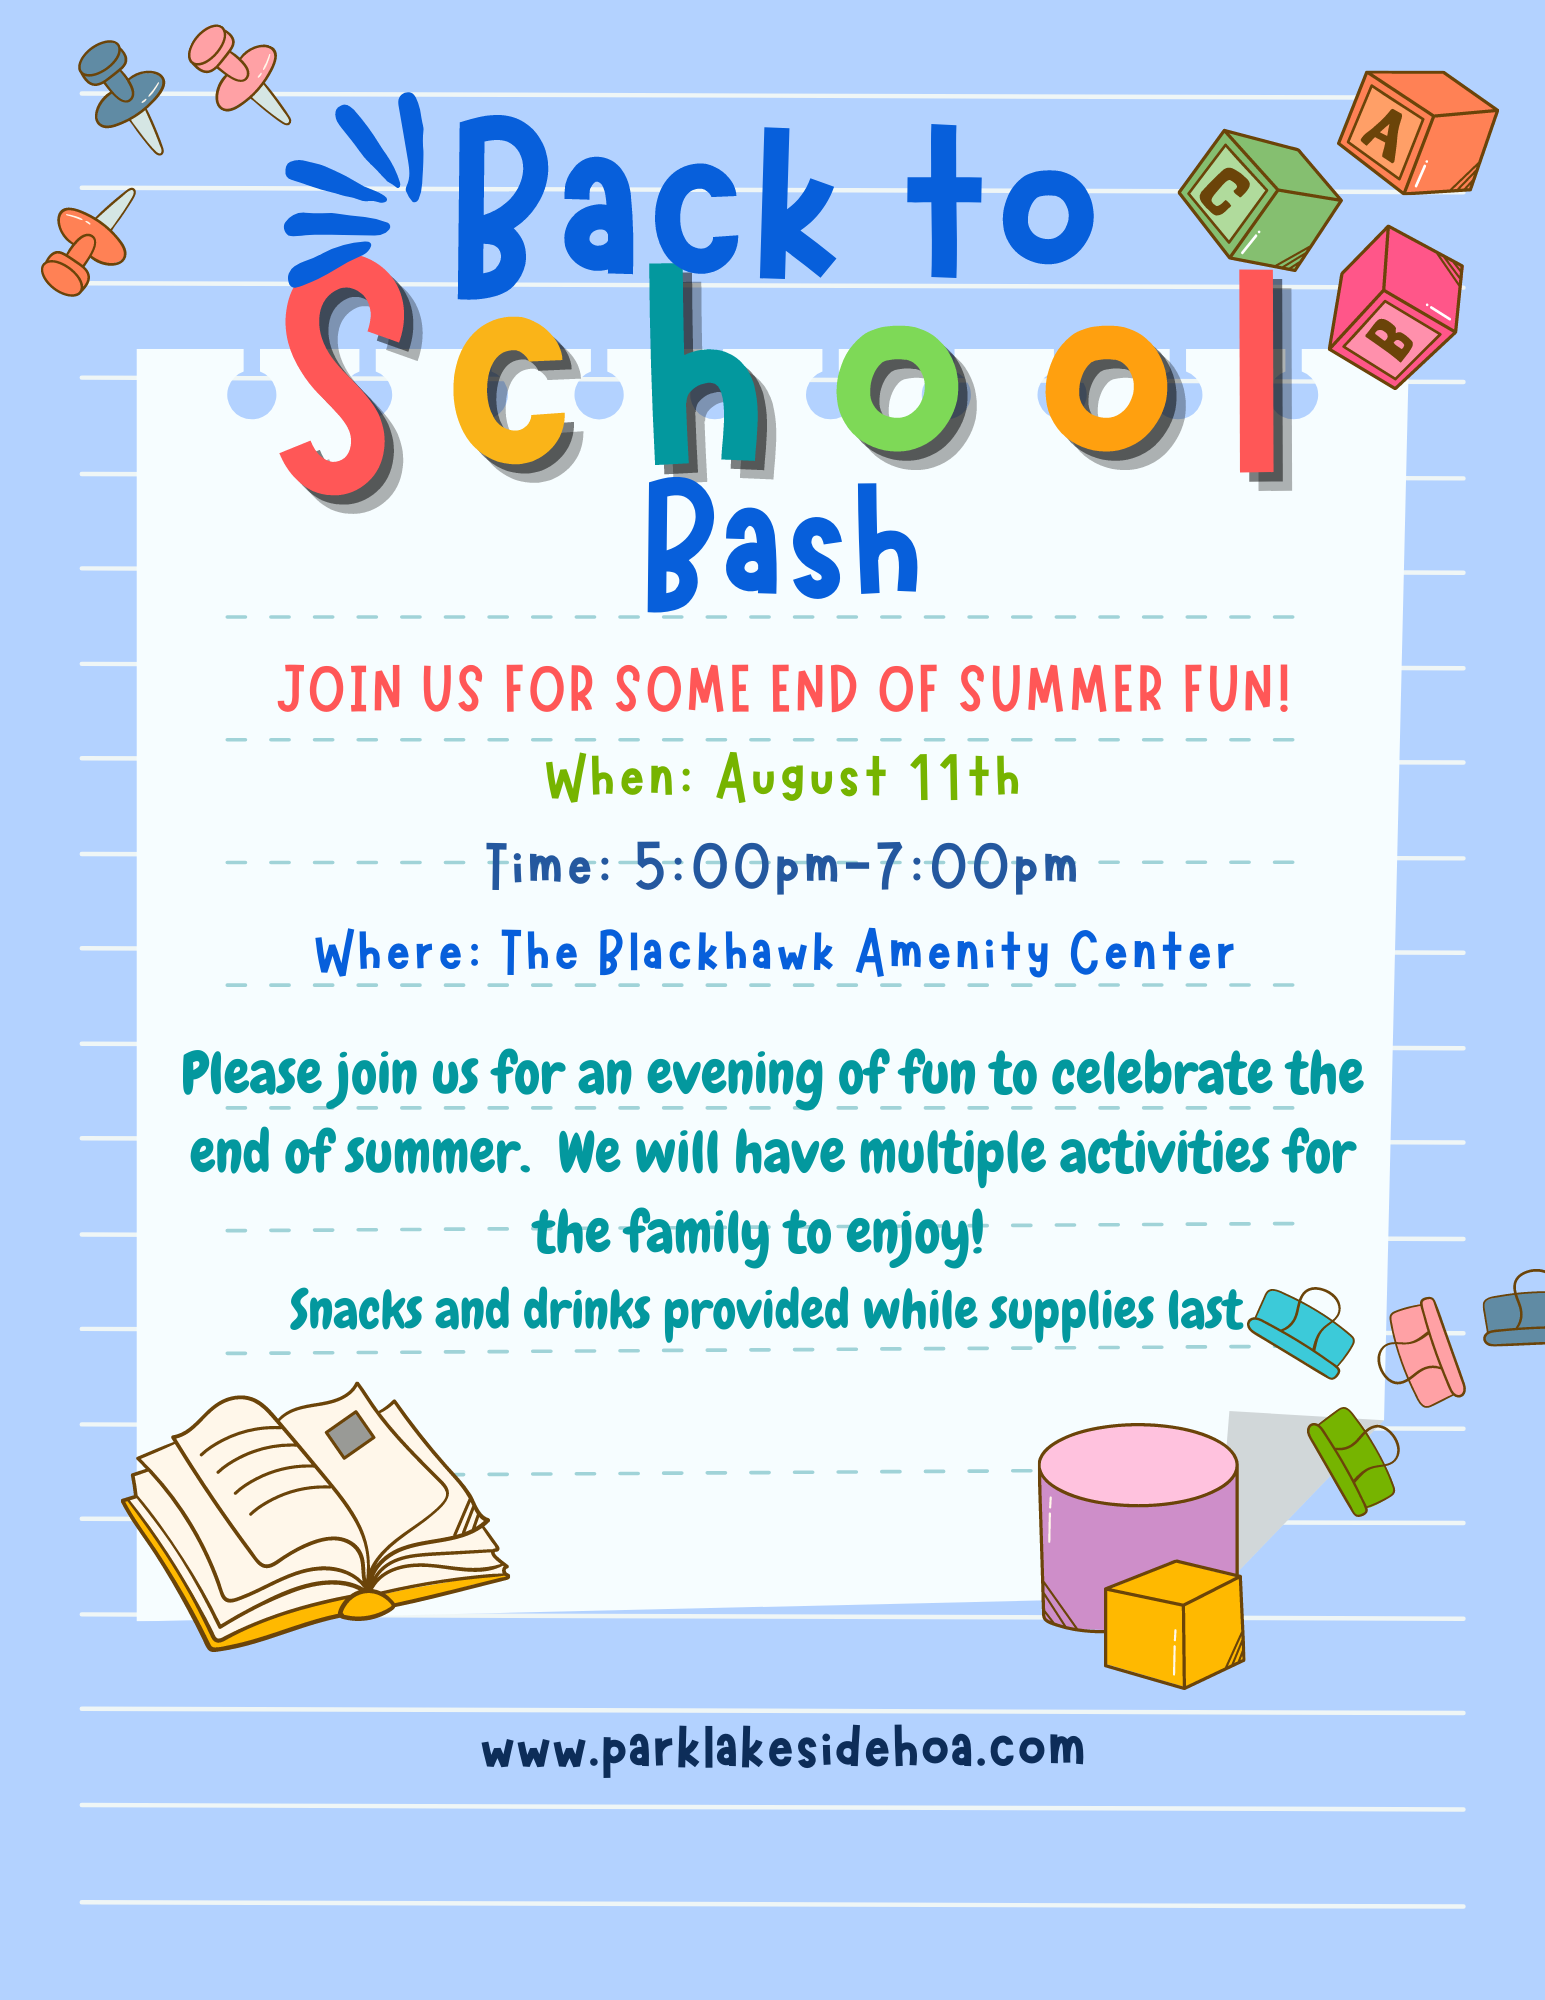 Flyer for a Back to School Bash at the Blackhawk Amenity Center on August 11th, from 5pm-7pm. Text reads: Please join us for an evening of fun to celebrate the end of summer. We will have multiple activities for the family to enjoy! Snacks and drinks provided while supplies last.